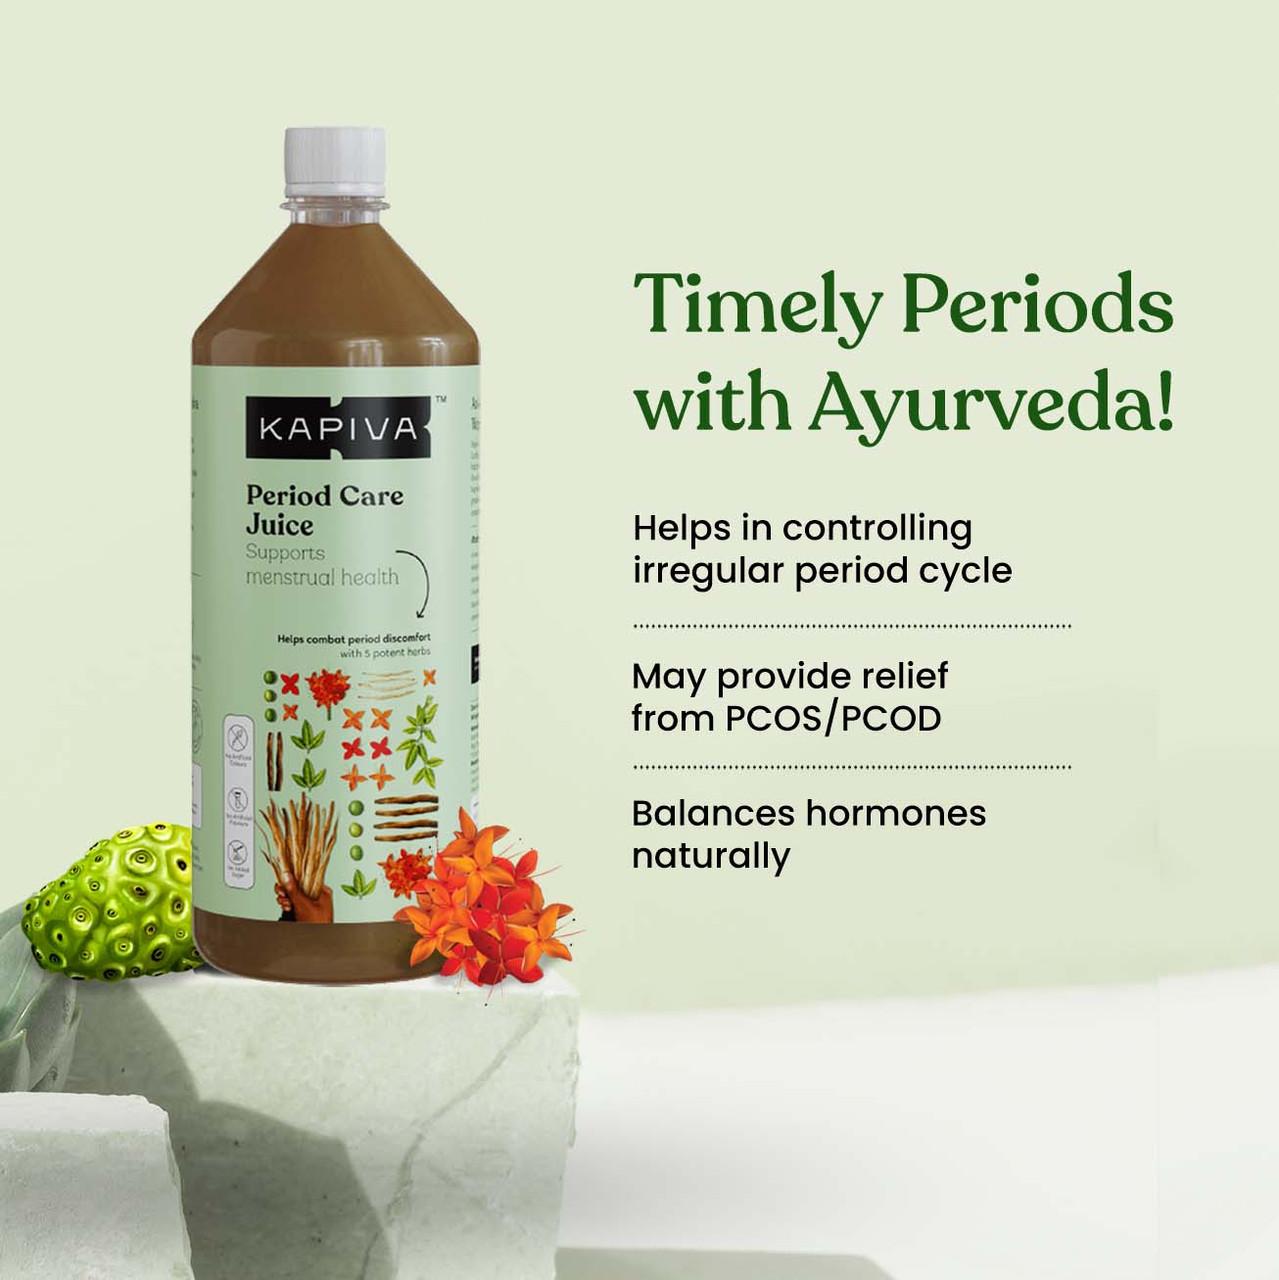 97% women got relief from period pain & cramps in 3 months.
An Ayurvedic Elixir that treats irregular periods. It may also provide relief from conditions like PCOS/PCOD. Made with 5 research backed ayurvedic herbs, it balances hormonal levels naturally.